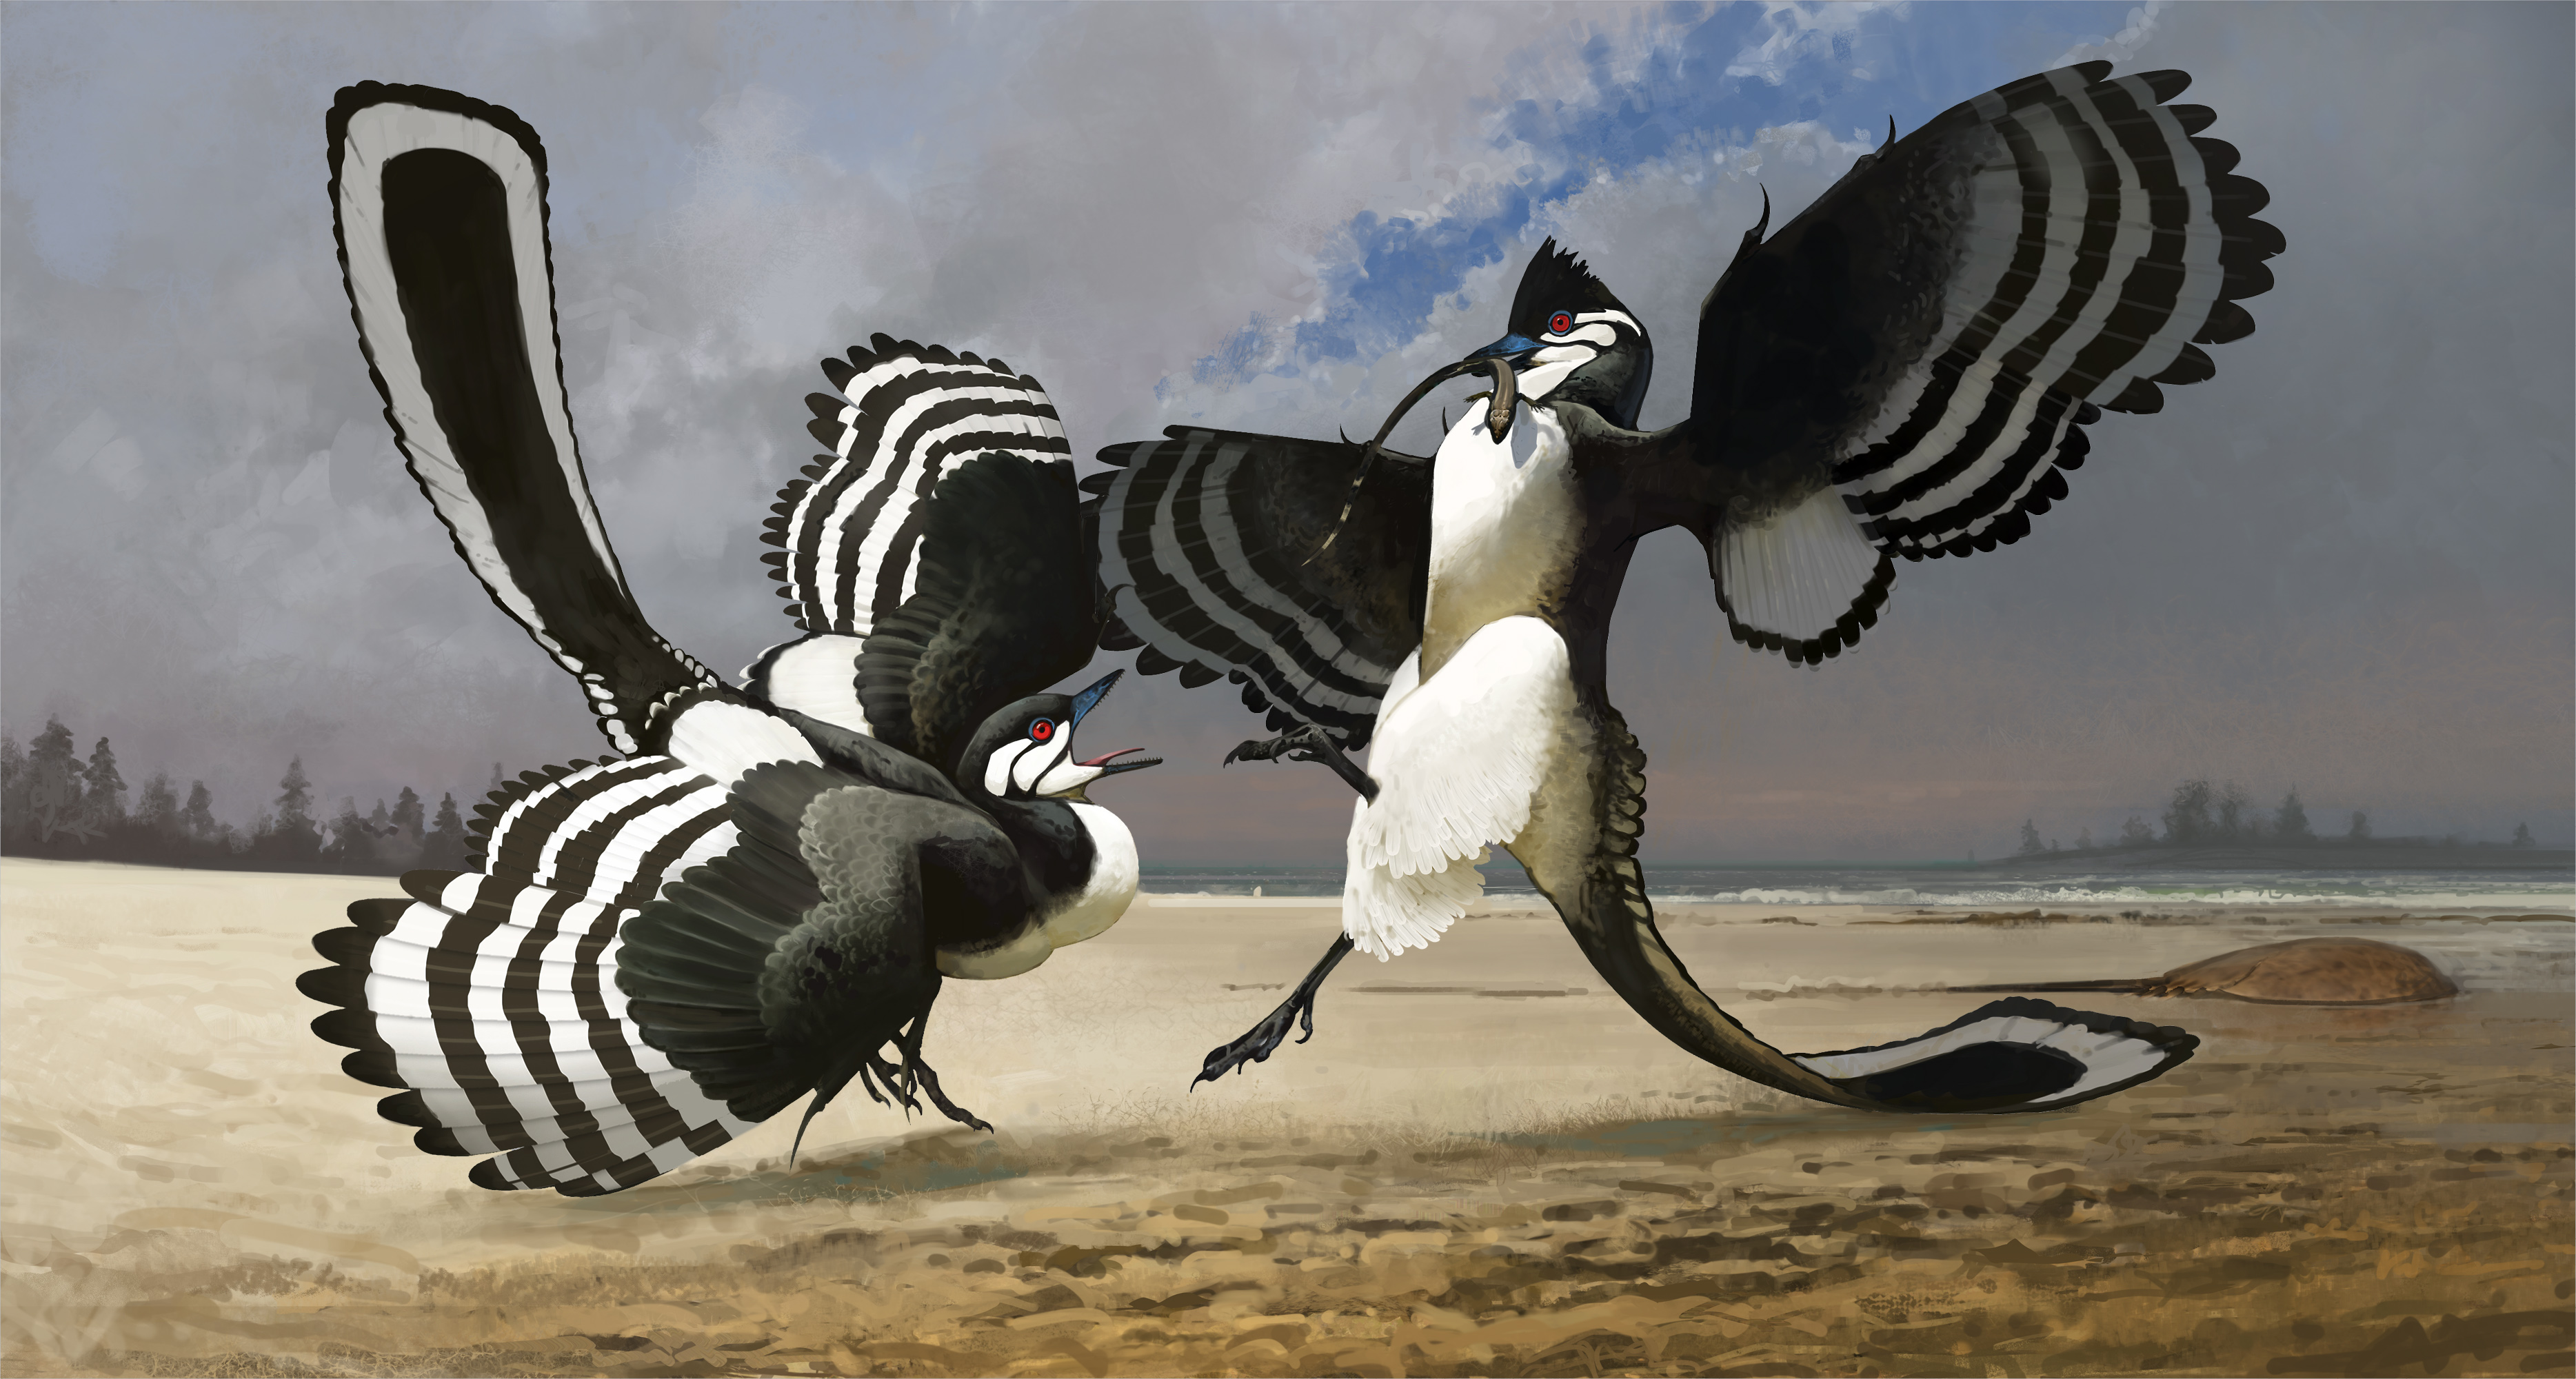 An artists rendering of two archaeopteryx fighting over a small animal which one is holding in it's mouth